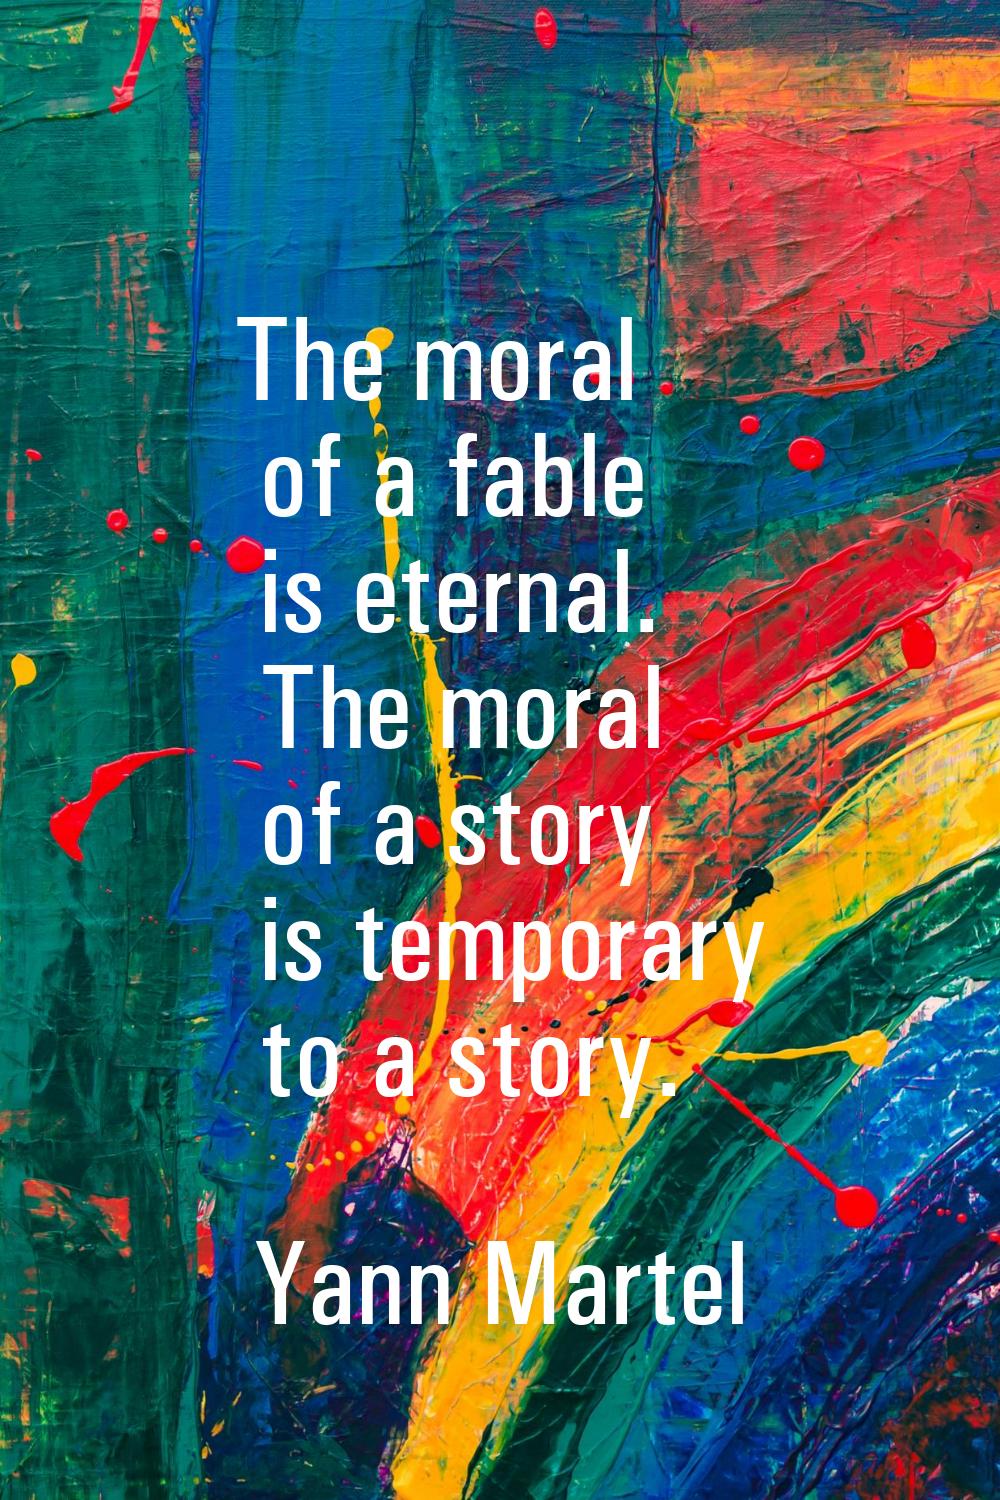 The moral of a fable is eternal. The moral of a story is temporary to a story.